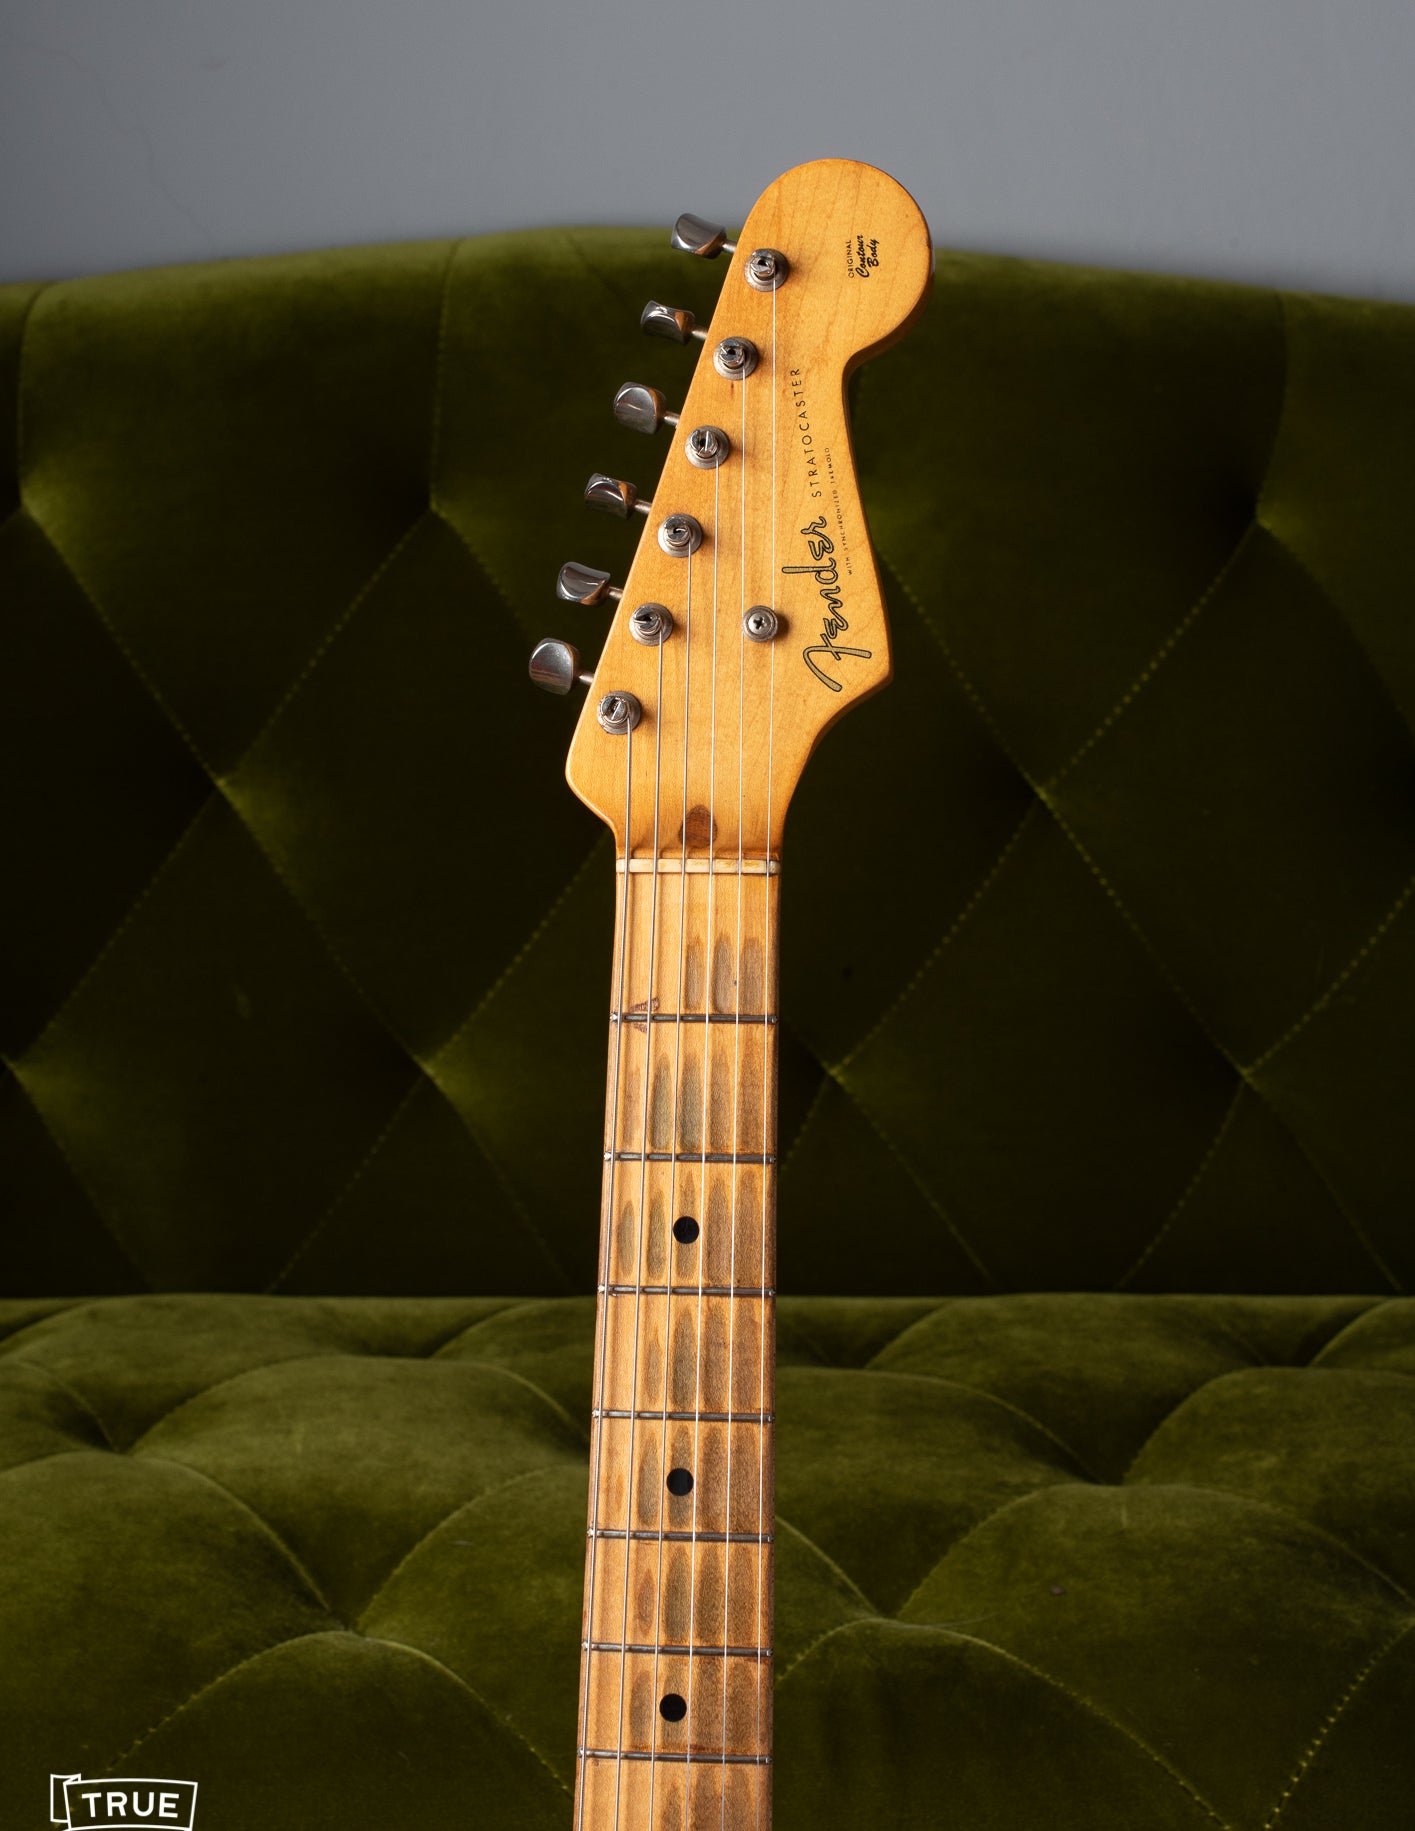 Maple neck with fretboard wear of Fender Stratocaster 1954